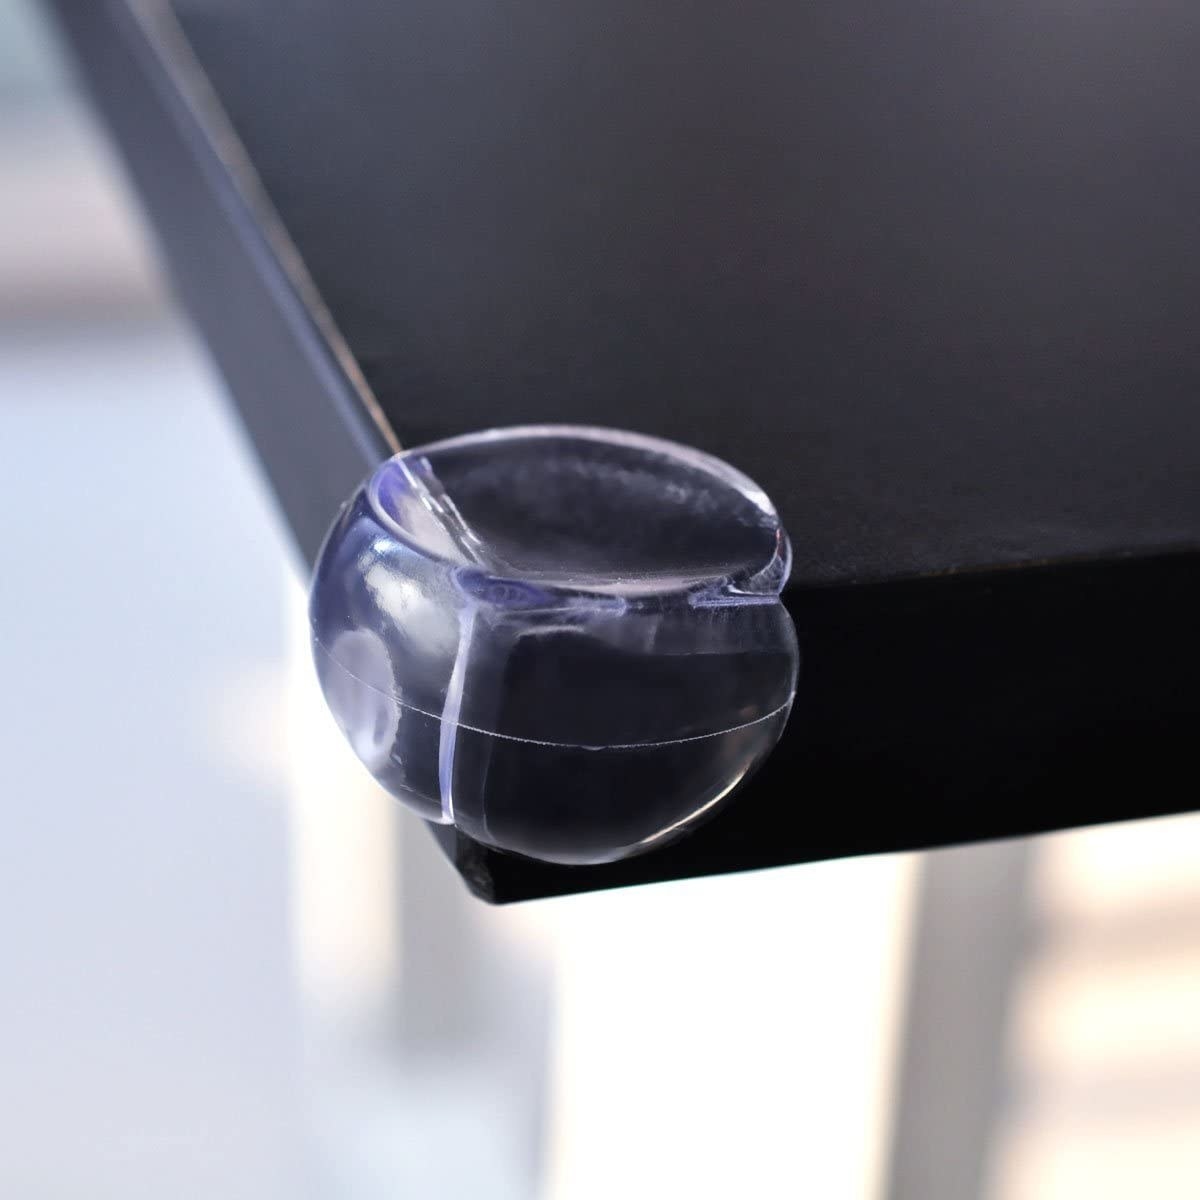 A close-up shot of the transparent corner protector on the edge of a table